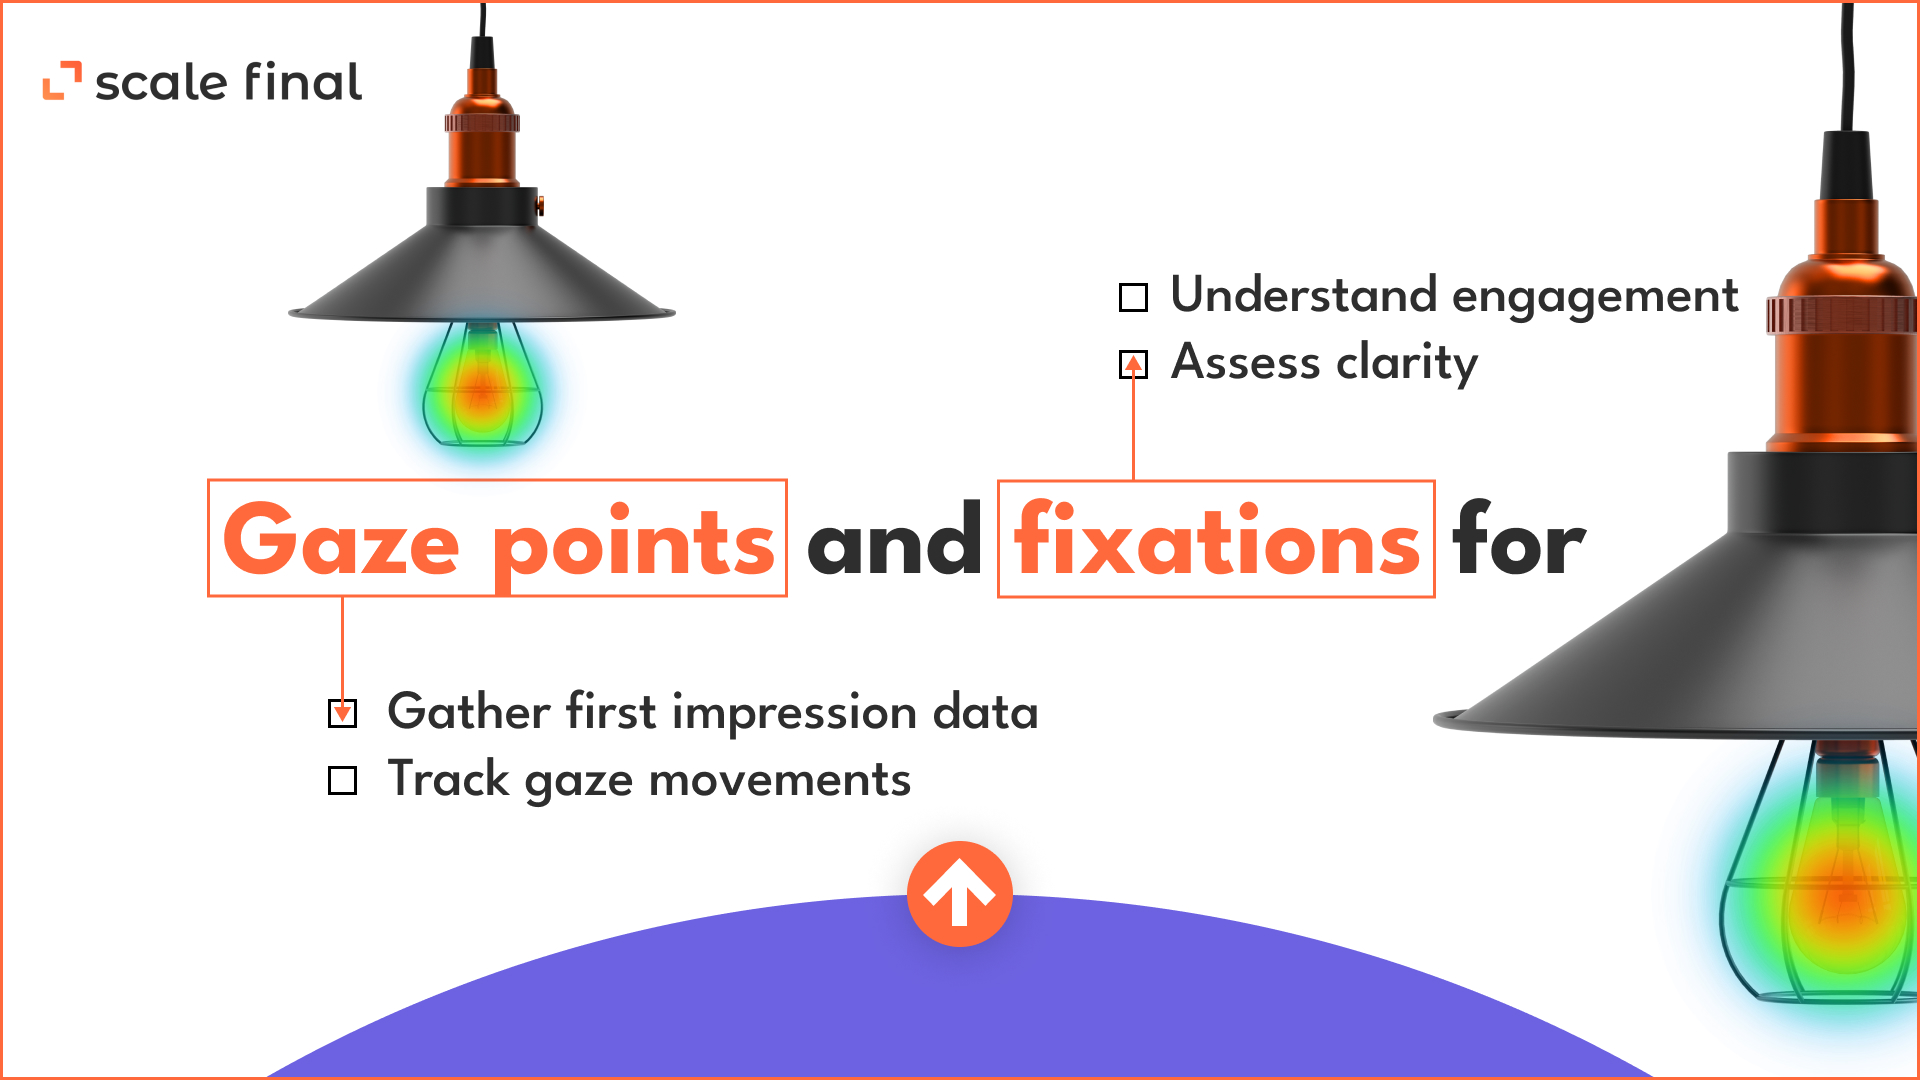 Eye tracking terms Gaze points and fixations forgaze points: Gather first impression dataTrack gaze movementsfixations: Understand engagementAssess clarity